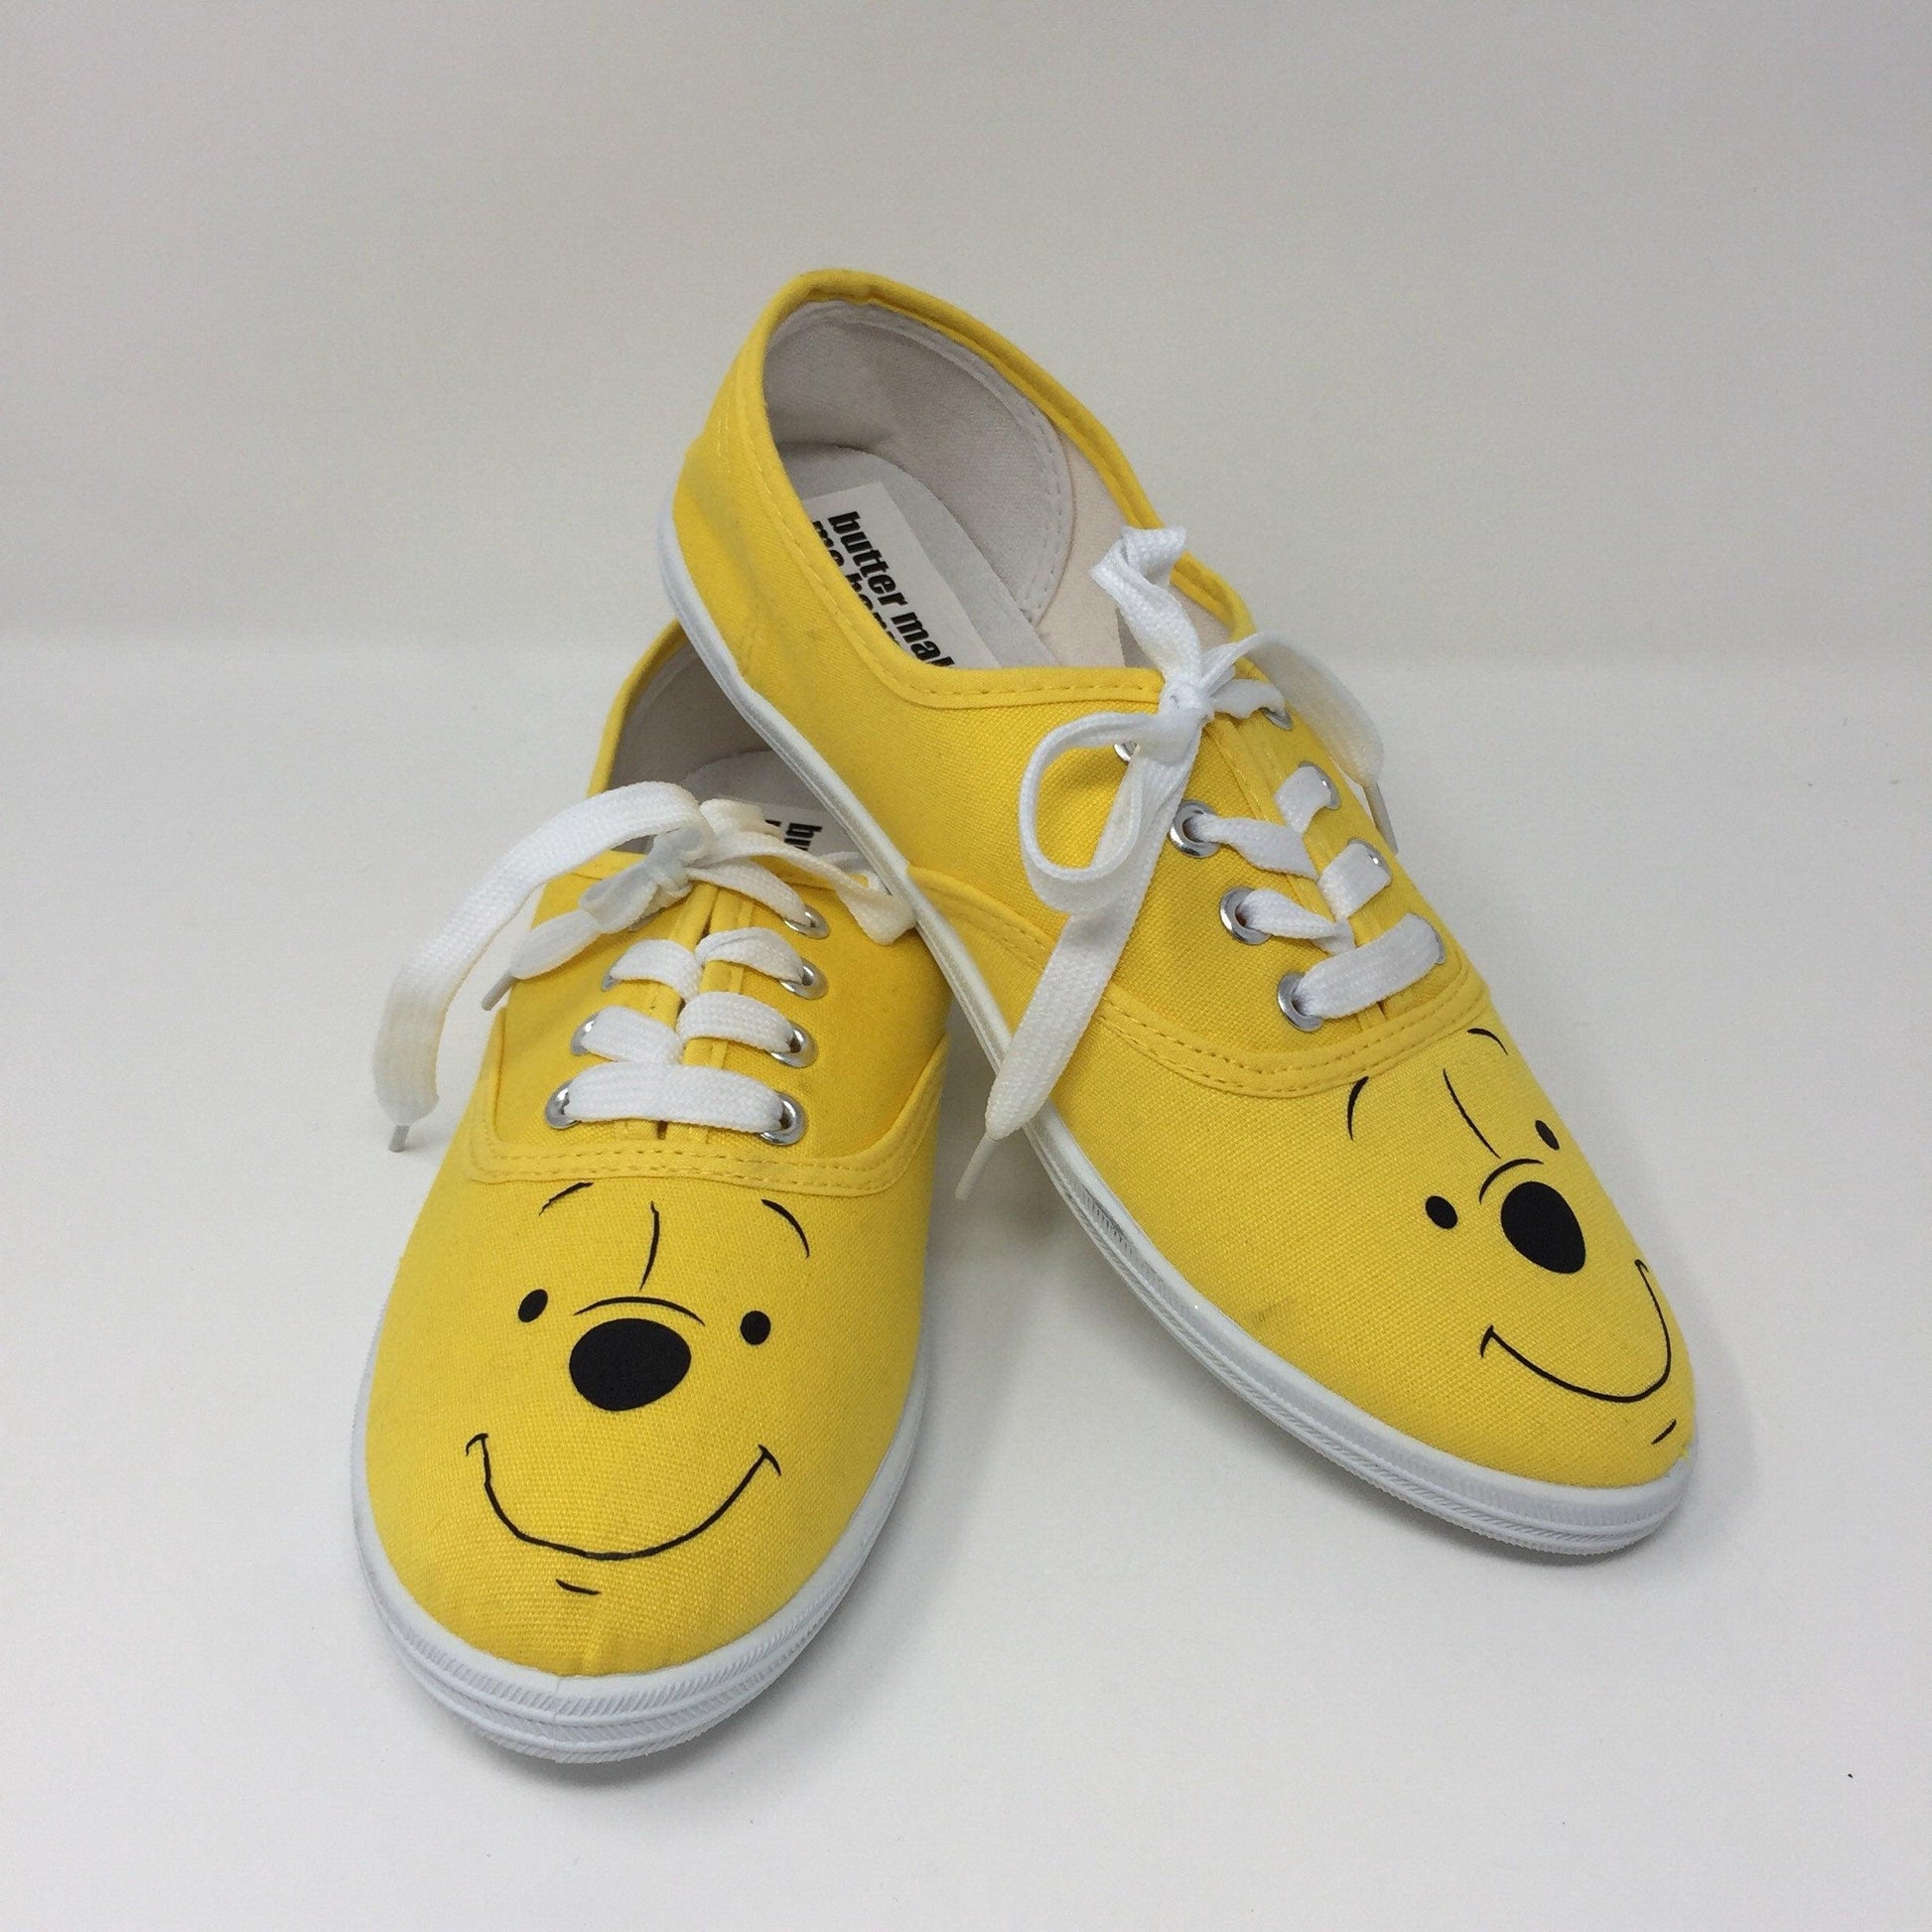 Winnie the Pooh Shoes 